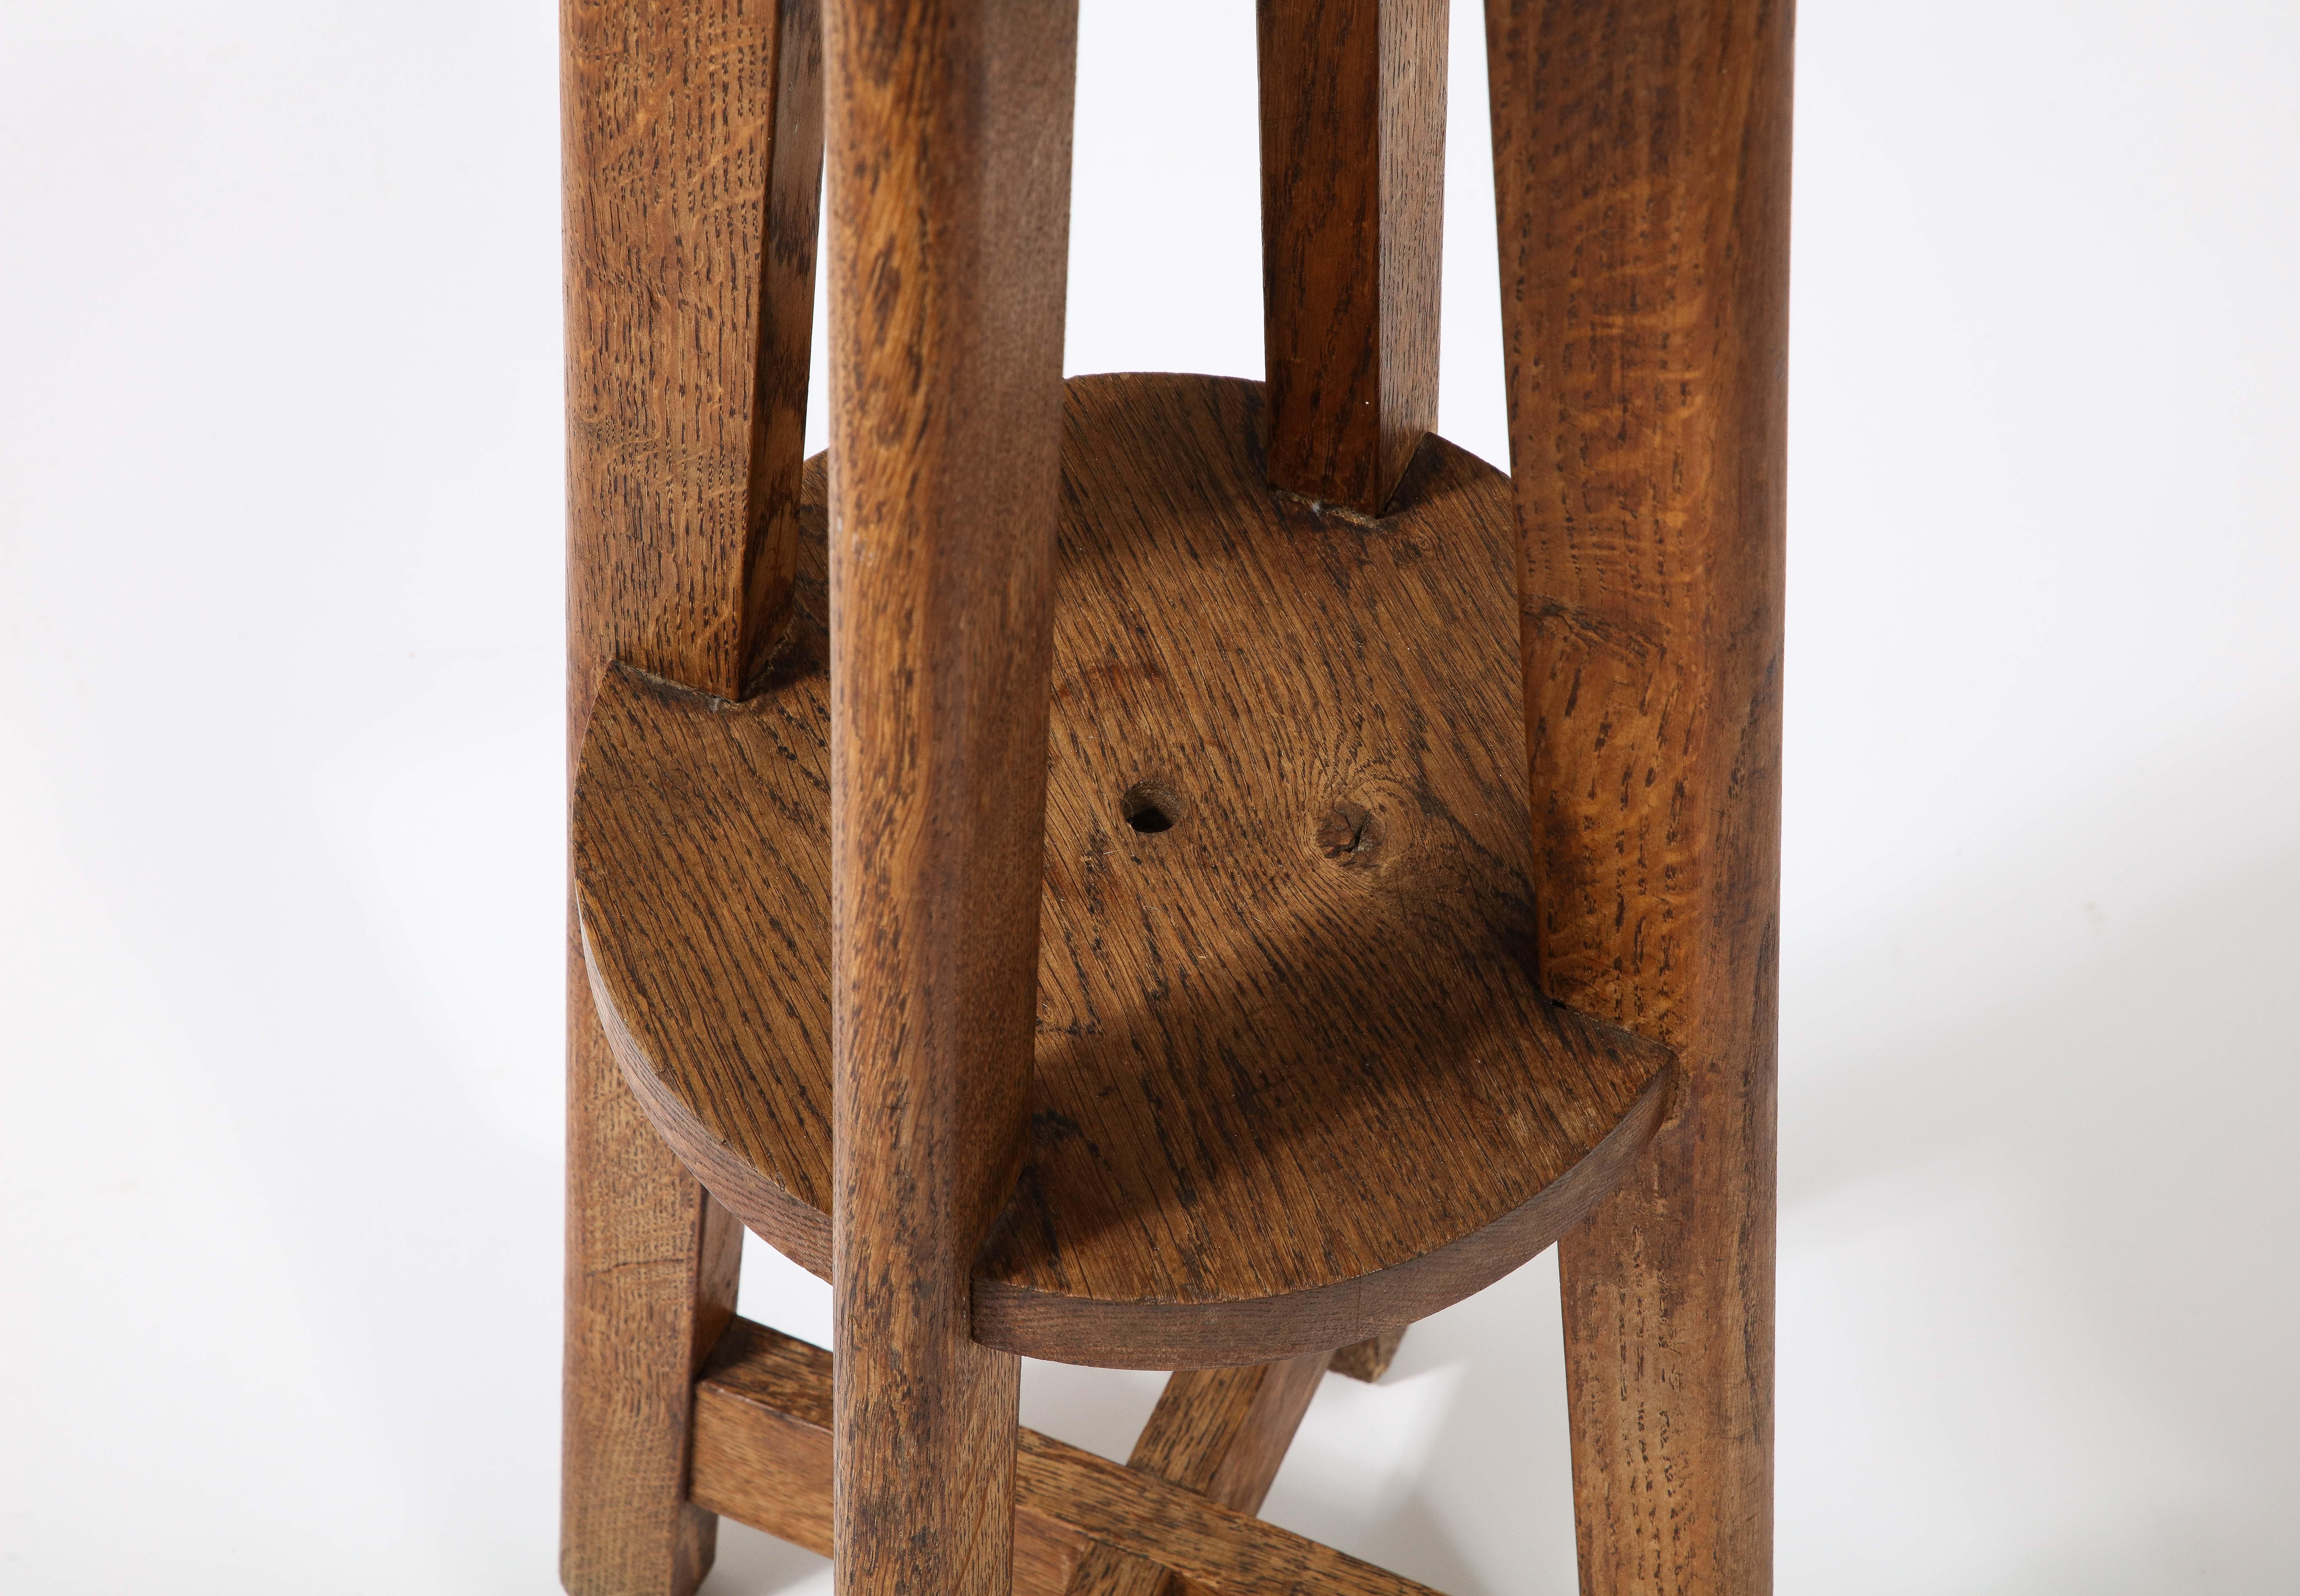 20th Century Tall Rustic Farm Stool or Pedestal in Solid Oak, France 1950's For Sale